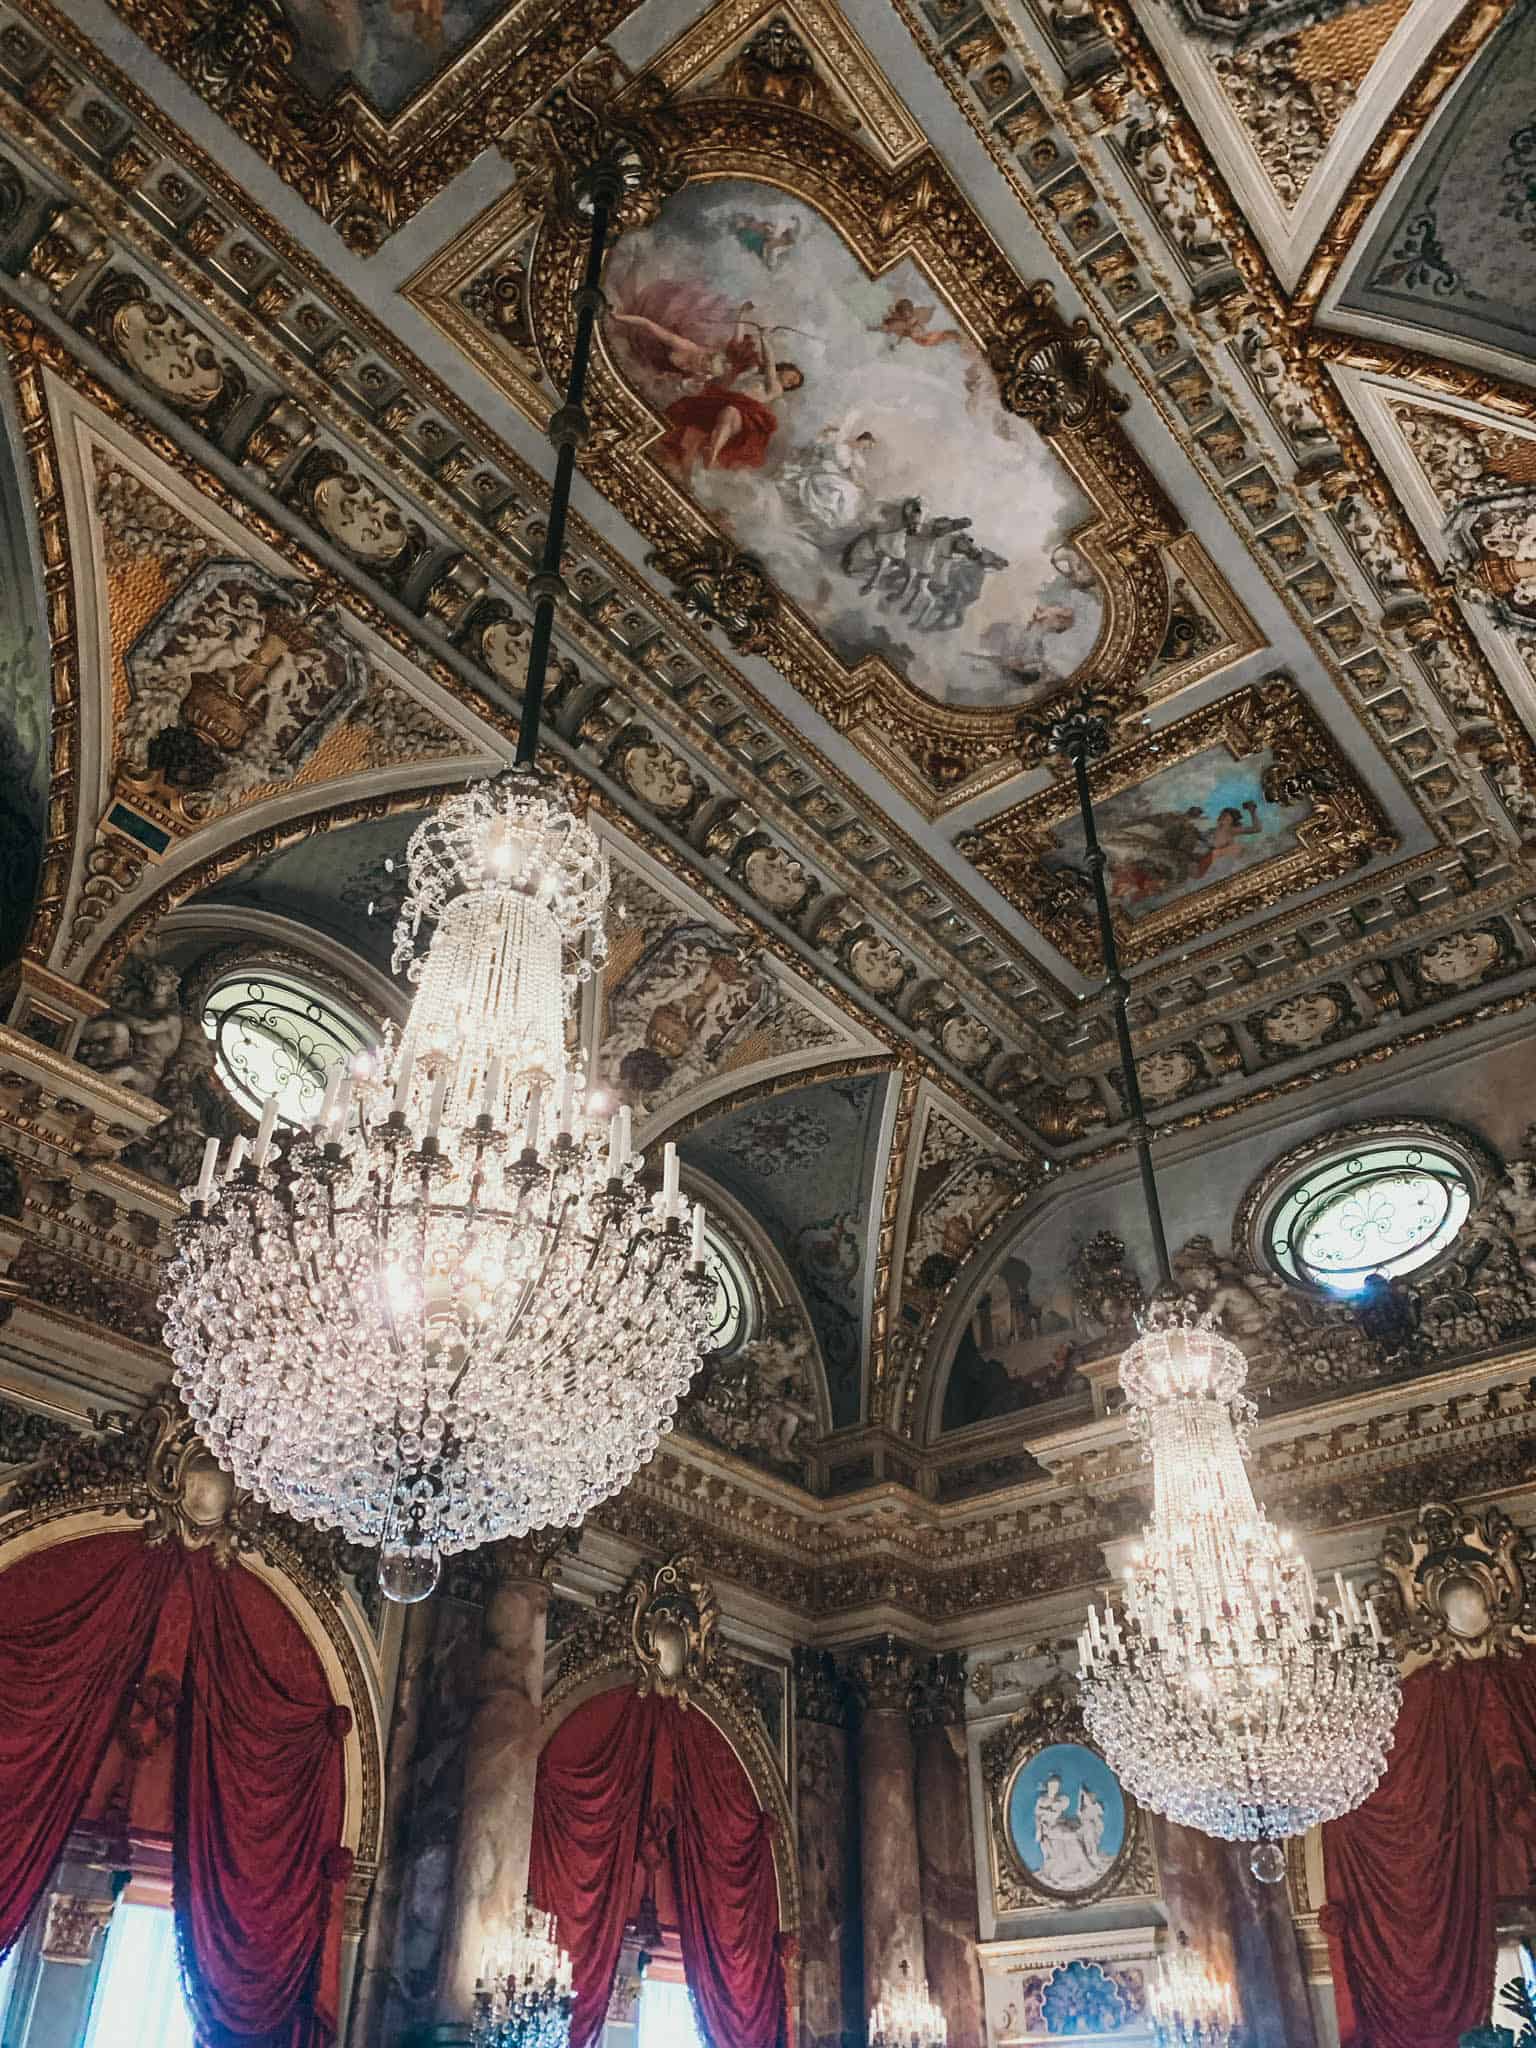 2 crystal chandeliers hanging down from an ornate painted ceiling